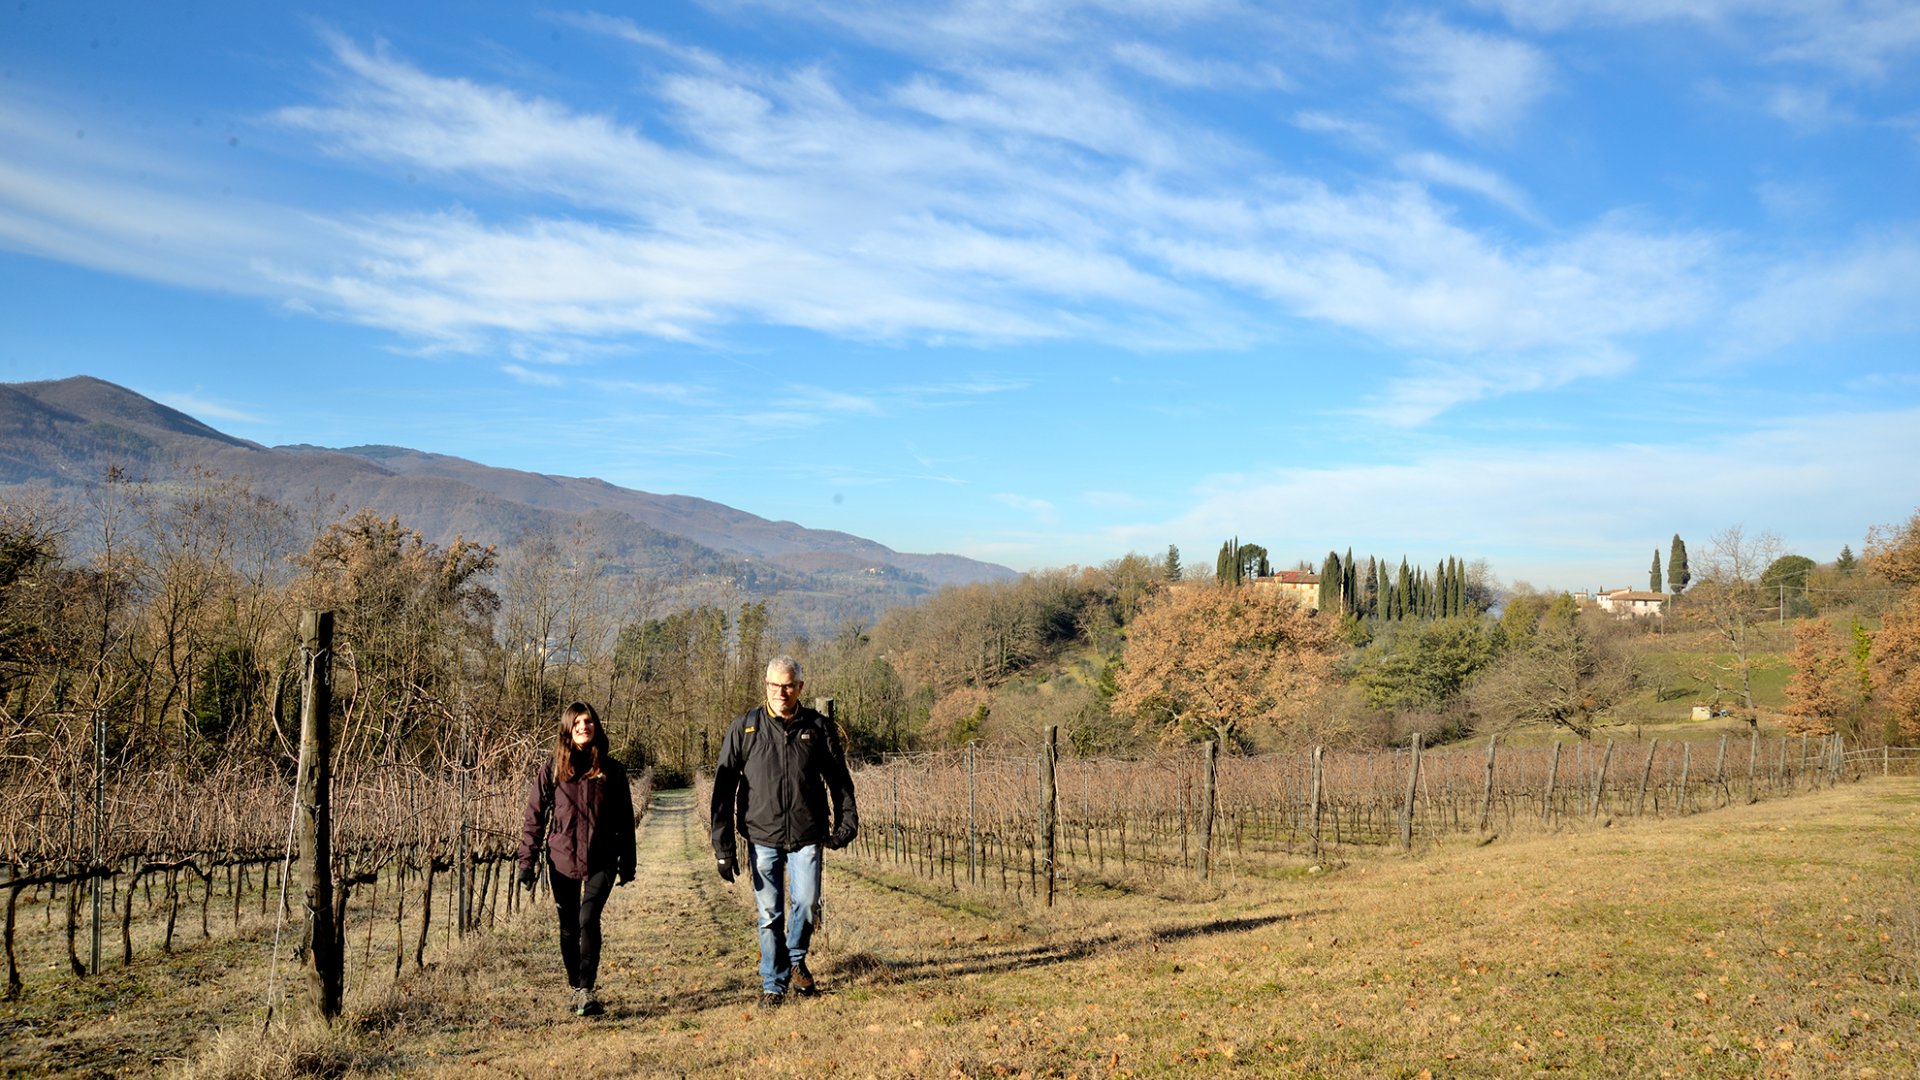 Trekking in Mugello guided by Mugellove and visit to a winery with wine tasting